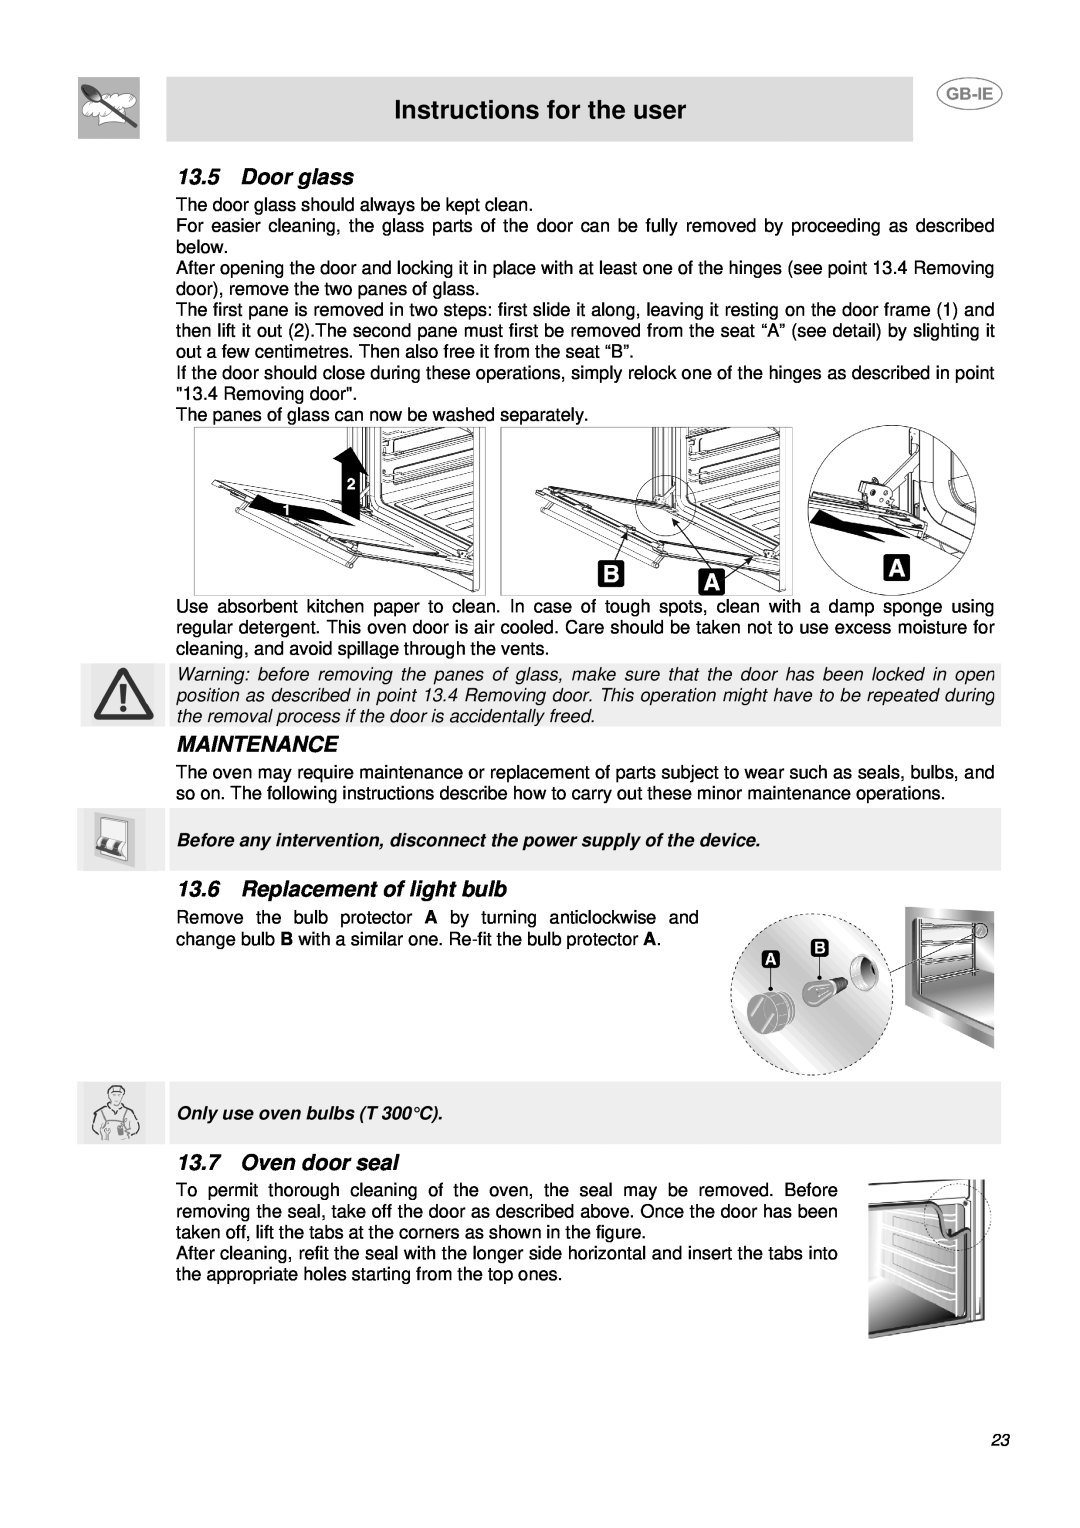 Smeg DUCO4SS manual Door glass, Maintenance, Replacement of light bulb, Oven door seal, Instructions for the user 